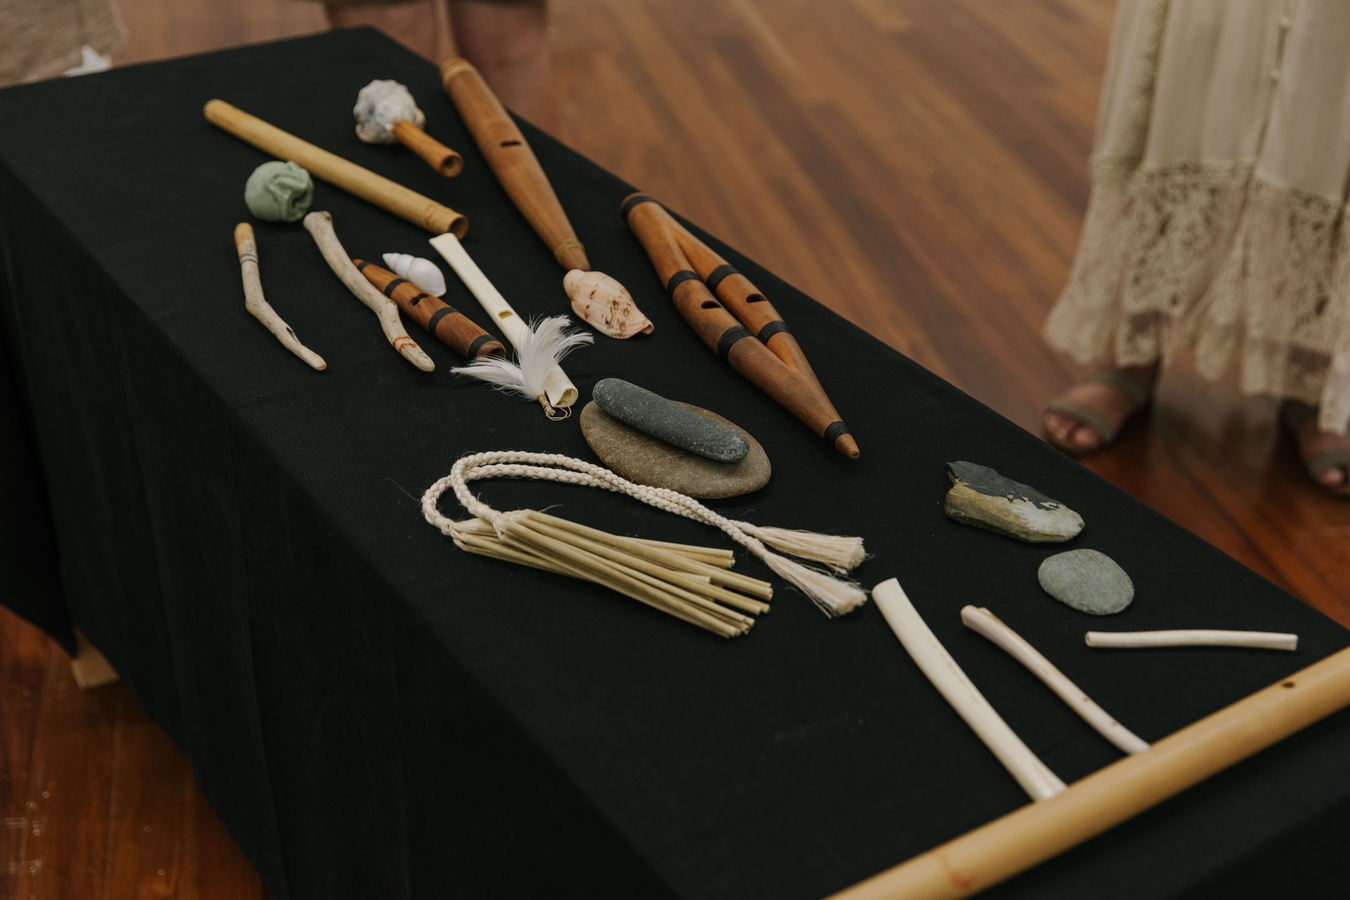 Image: Ruby Mae Hinepunui Solly, instruments for opening performance, 27 January 2023. Photo by Nancy Zhou.